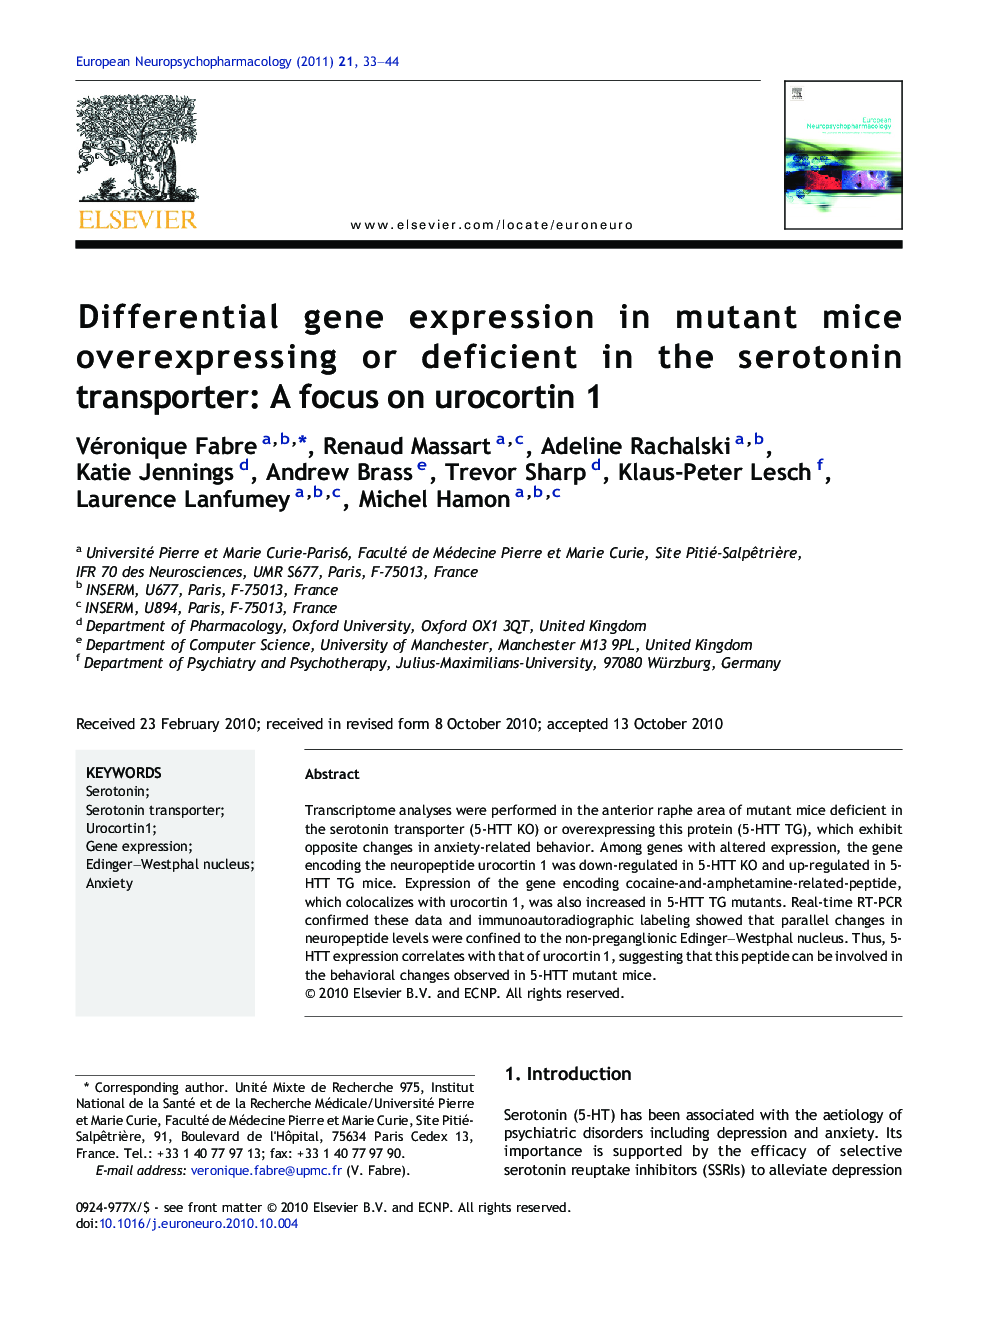 Differential gene expression in mutant mice overexpressing or deficient in the serotonin transporter: A focus on urocortin 1